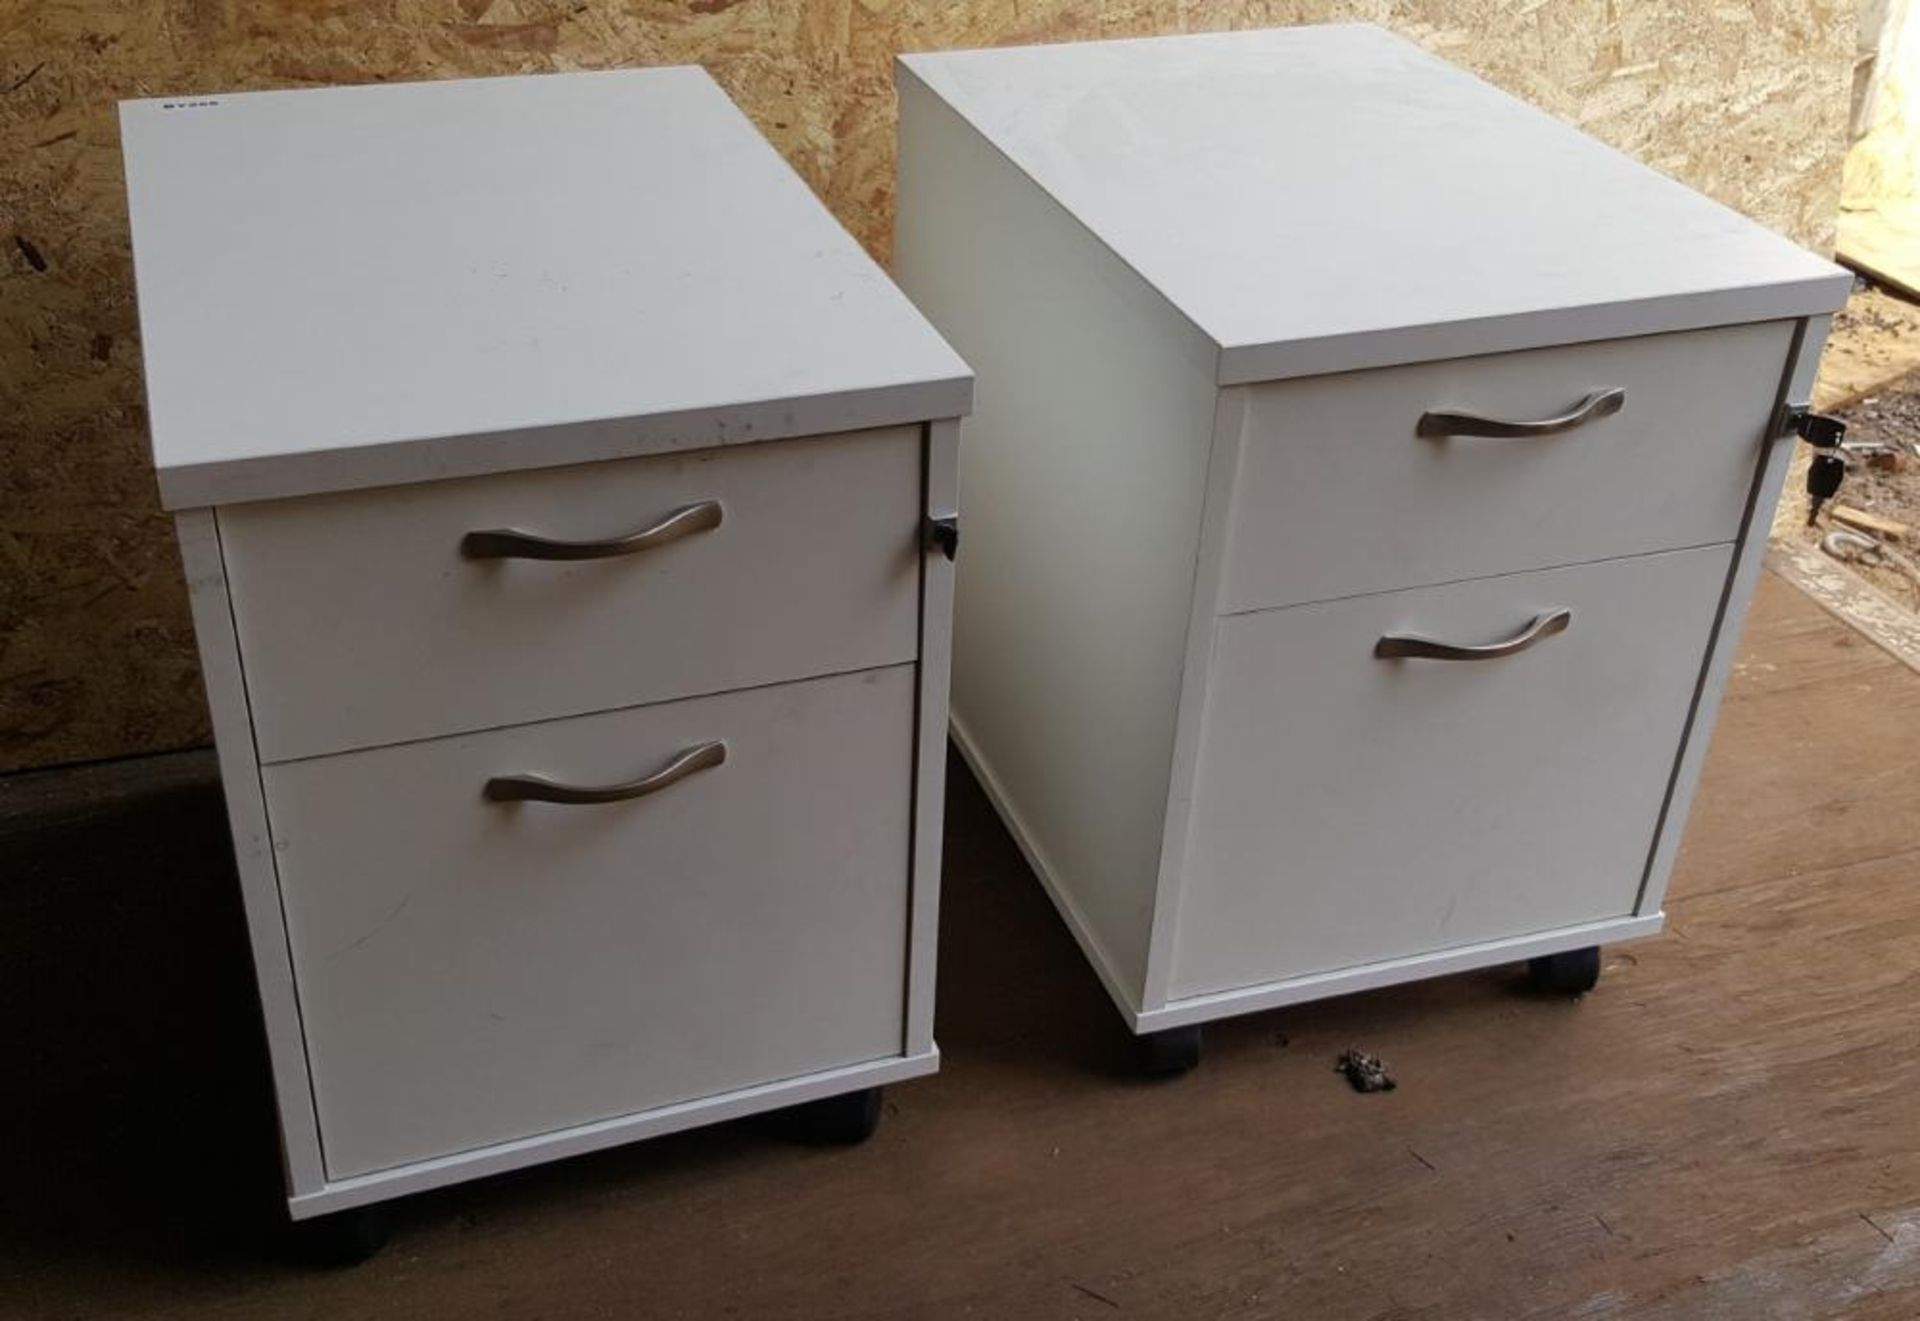 Matching Pair Of Mobile Under-Counter Wooden Lockable Office Drawers In White On Castors - Ref BY294